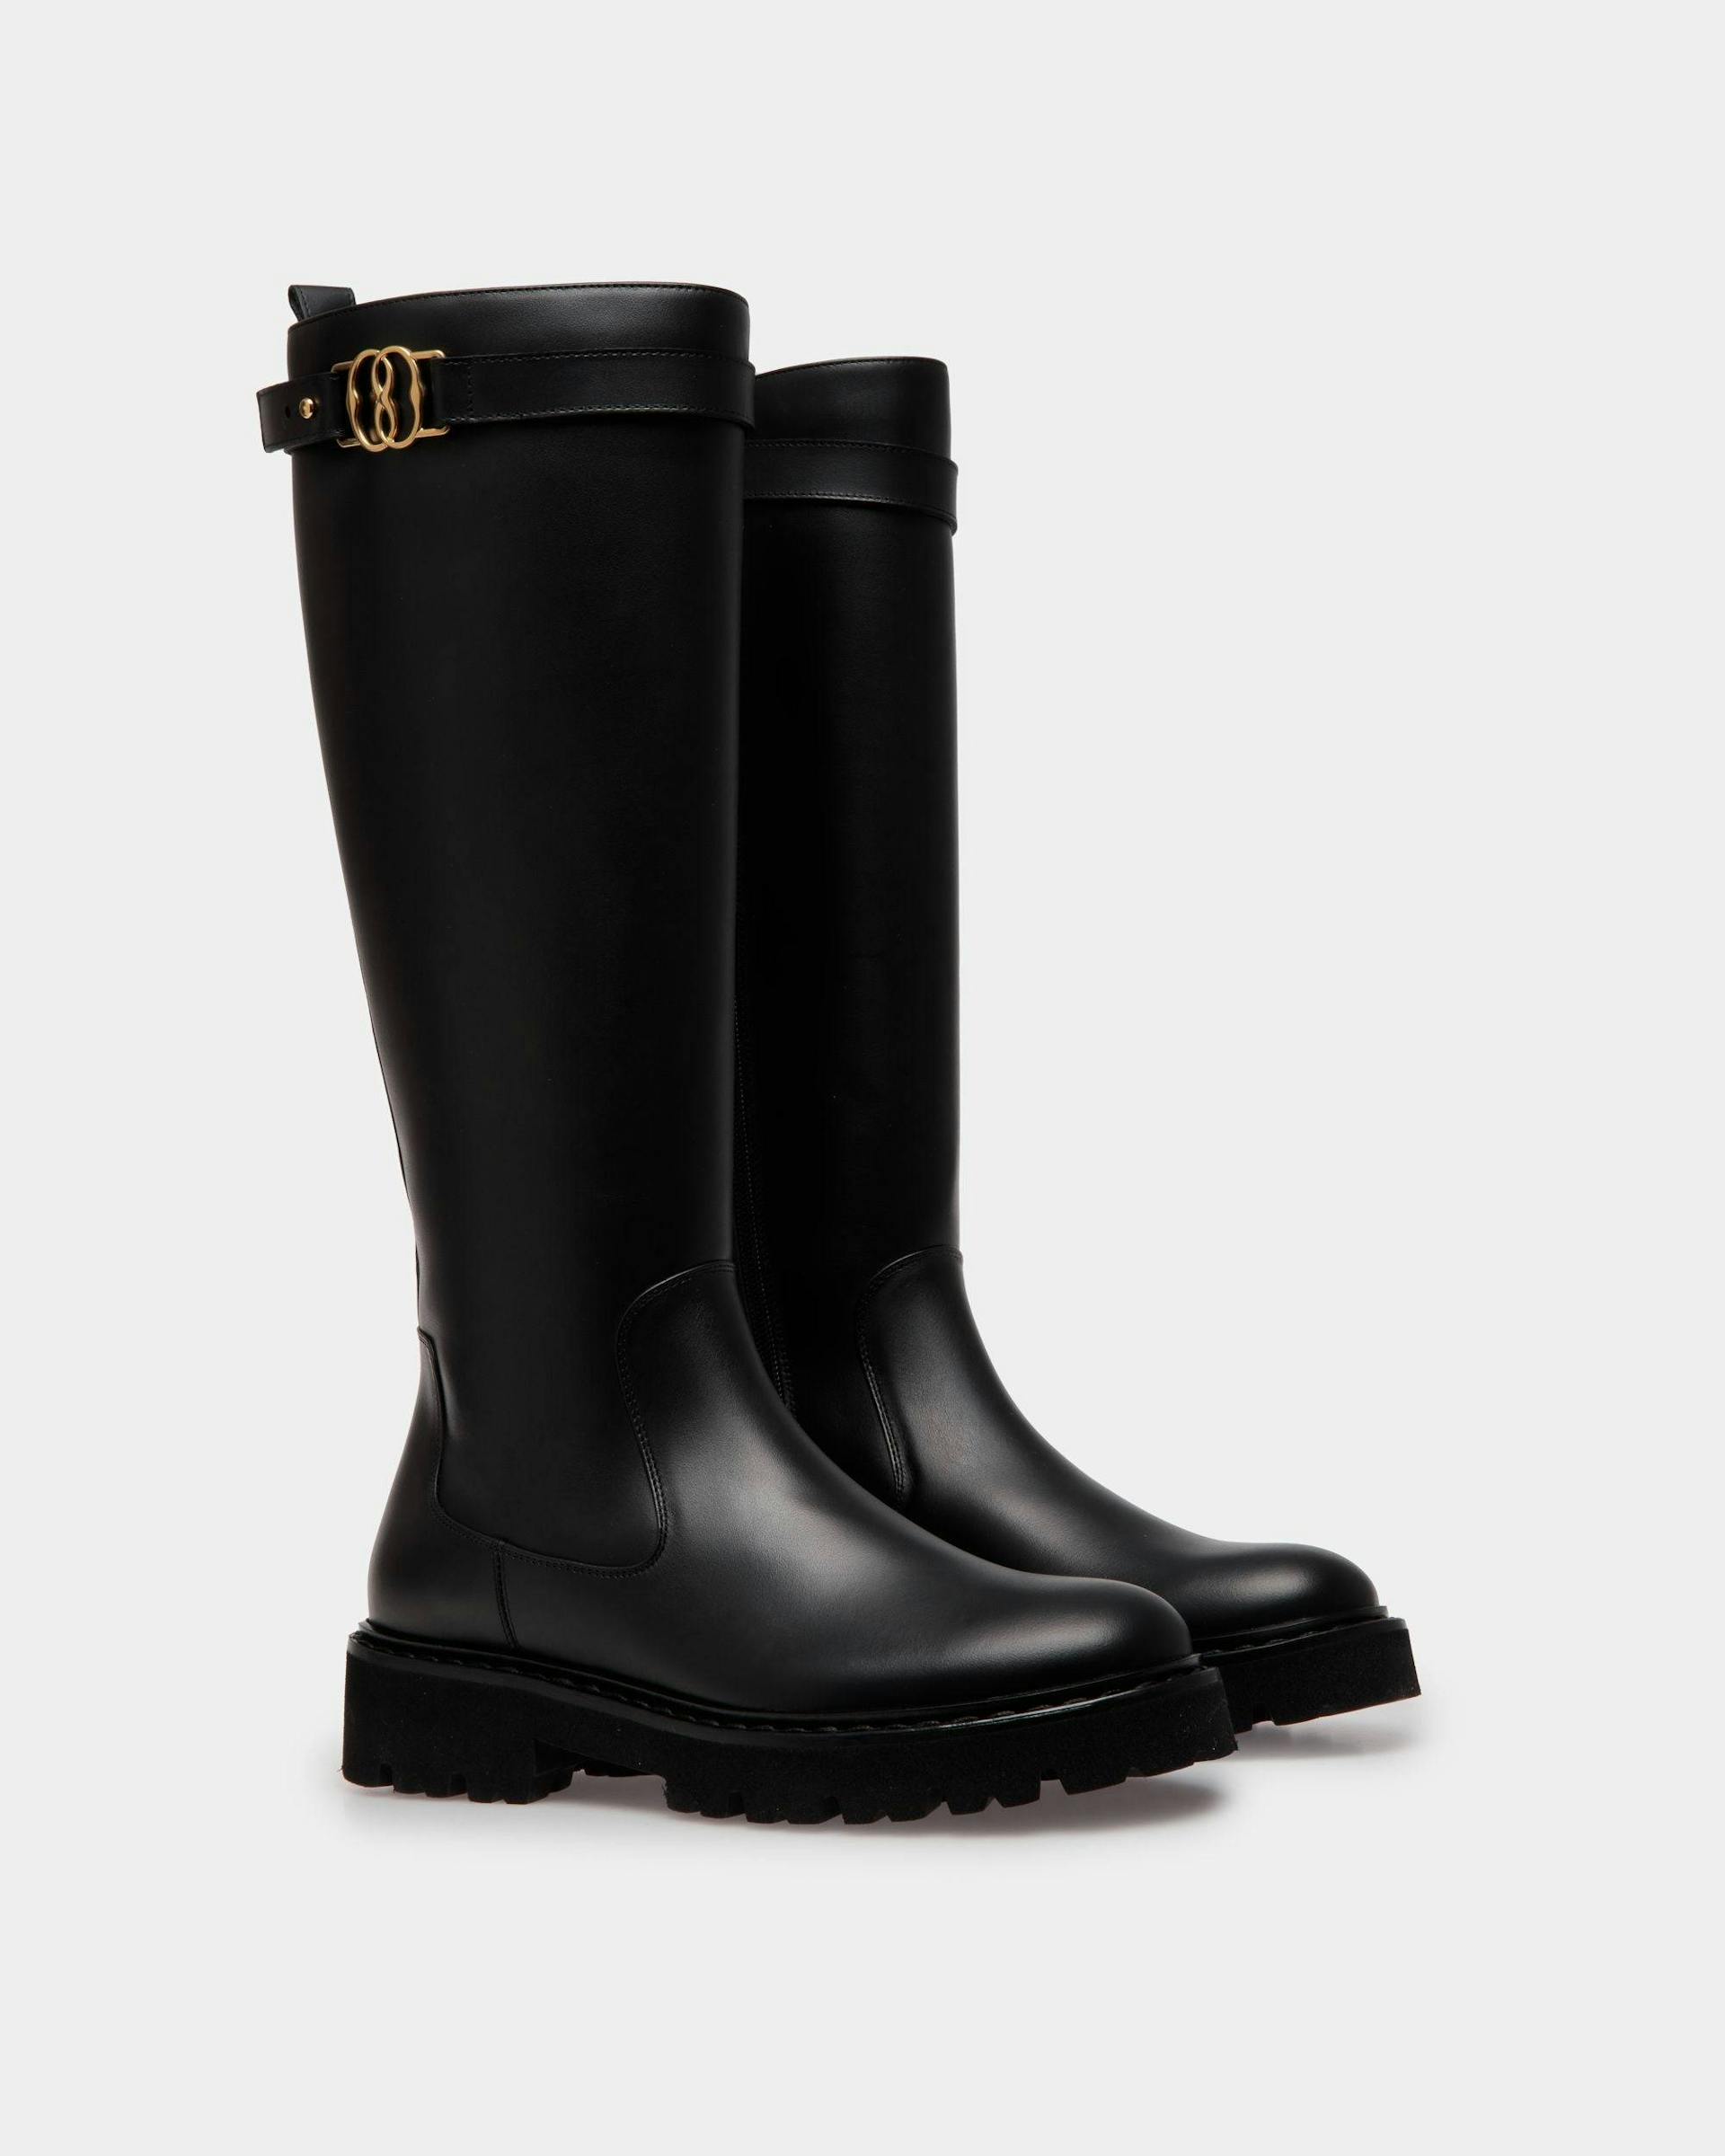 Women's Enga Long Boots In Black Leather | Bally | Still Life 3/4 Front